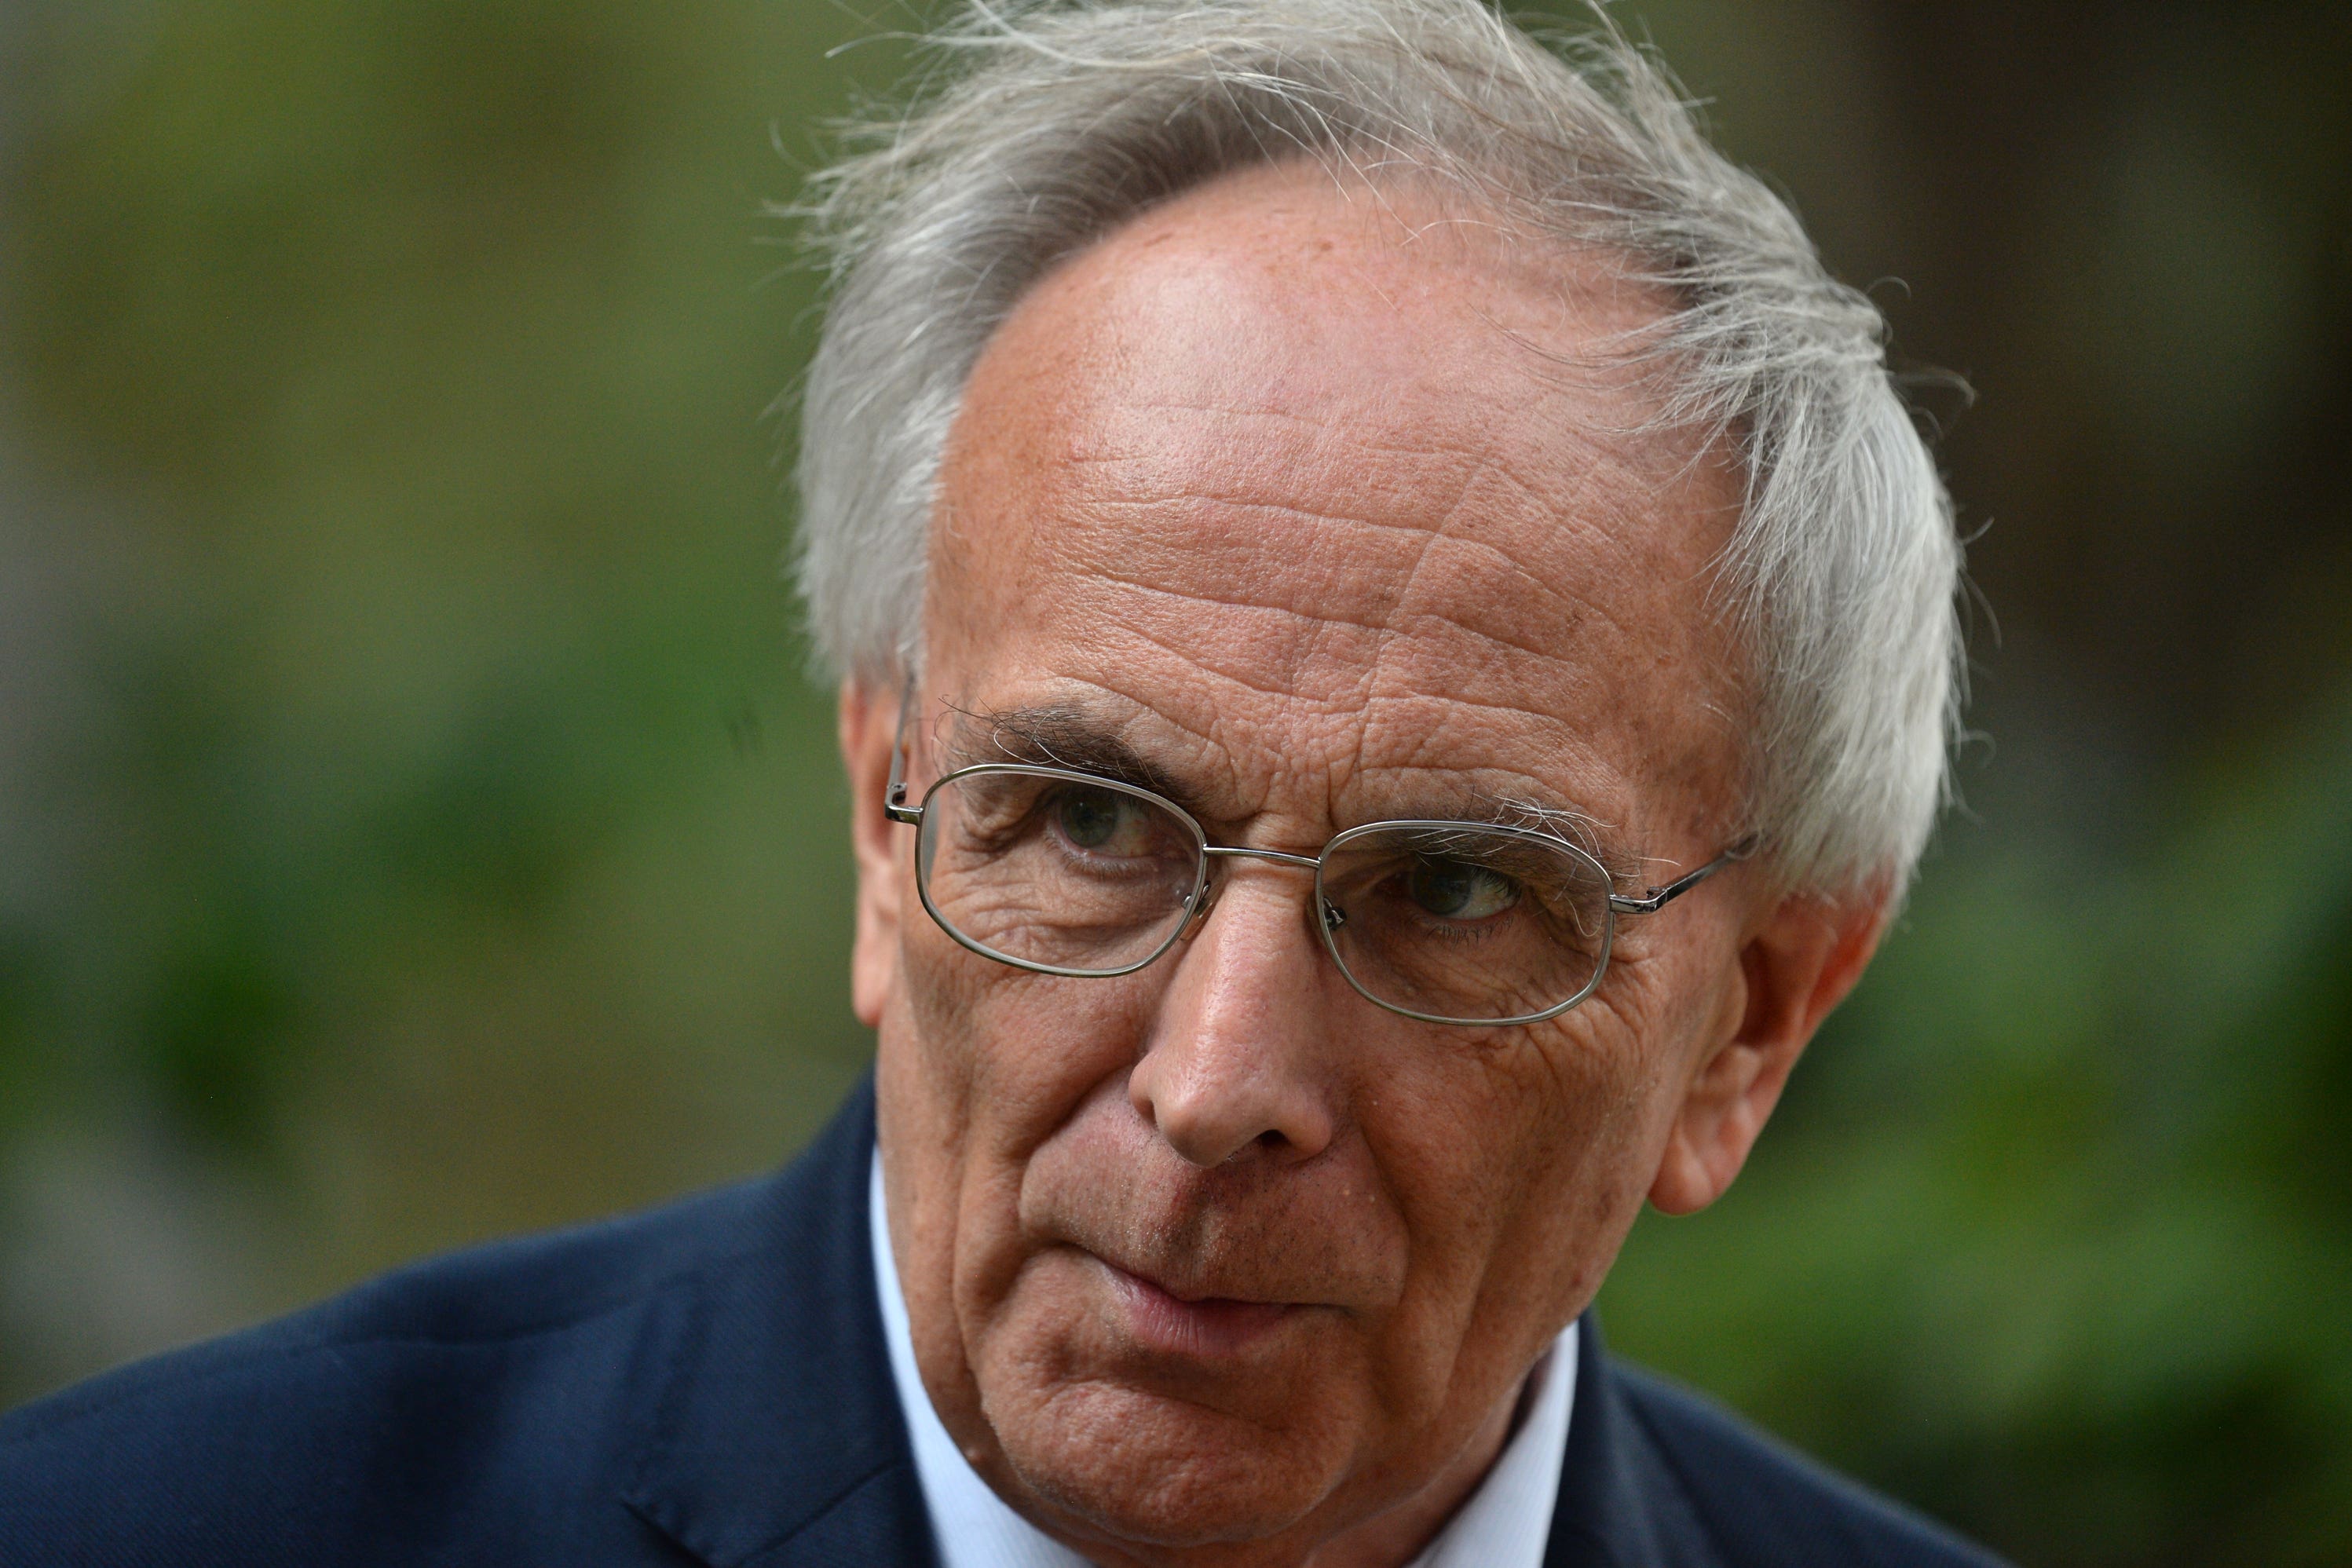 Former Tory MP Peter Bone was ousted by voters through a recall petition (Kirsty O’Connor/PA)